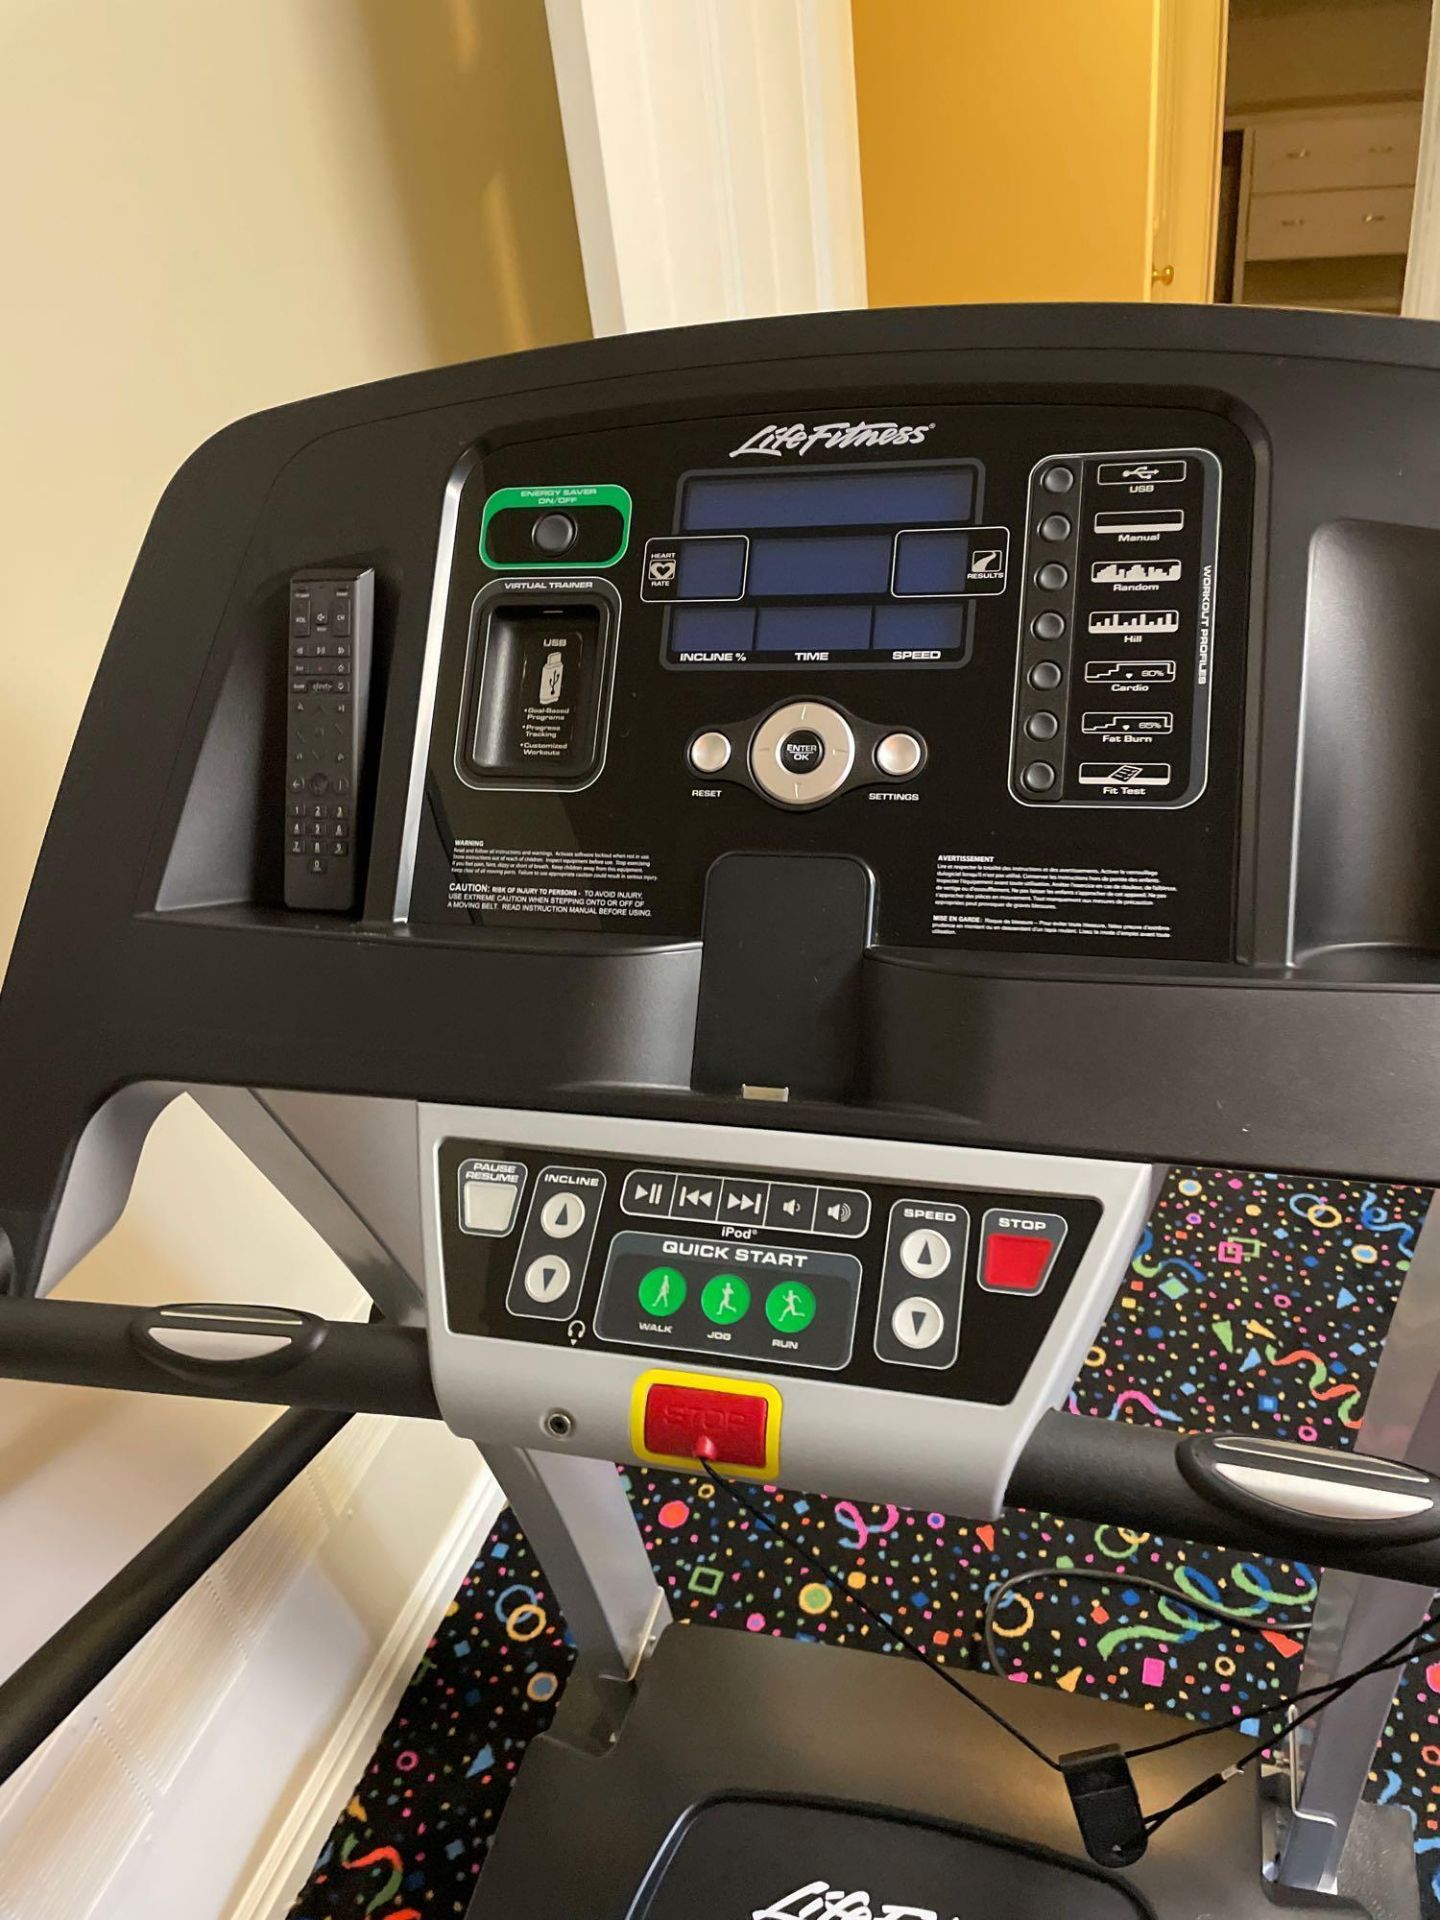 (exercise room) Life fitness treadmill flex deck - Image 2 of 4